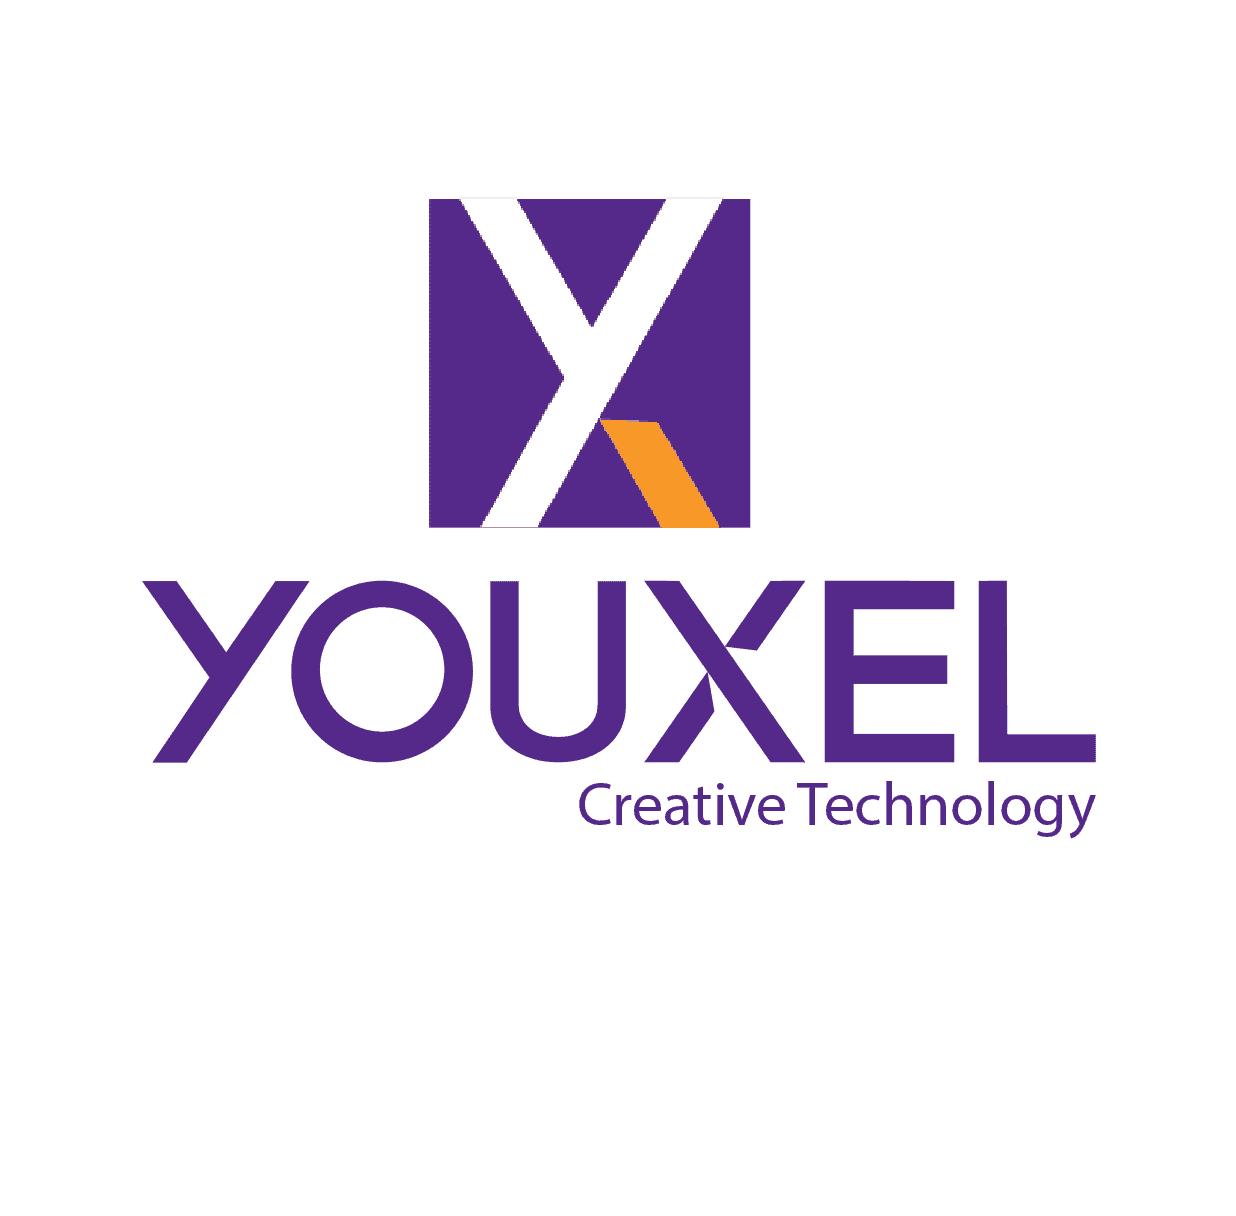 Youxel software Company.